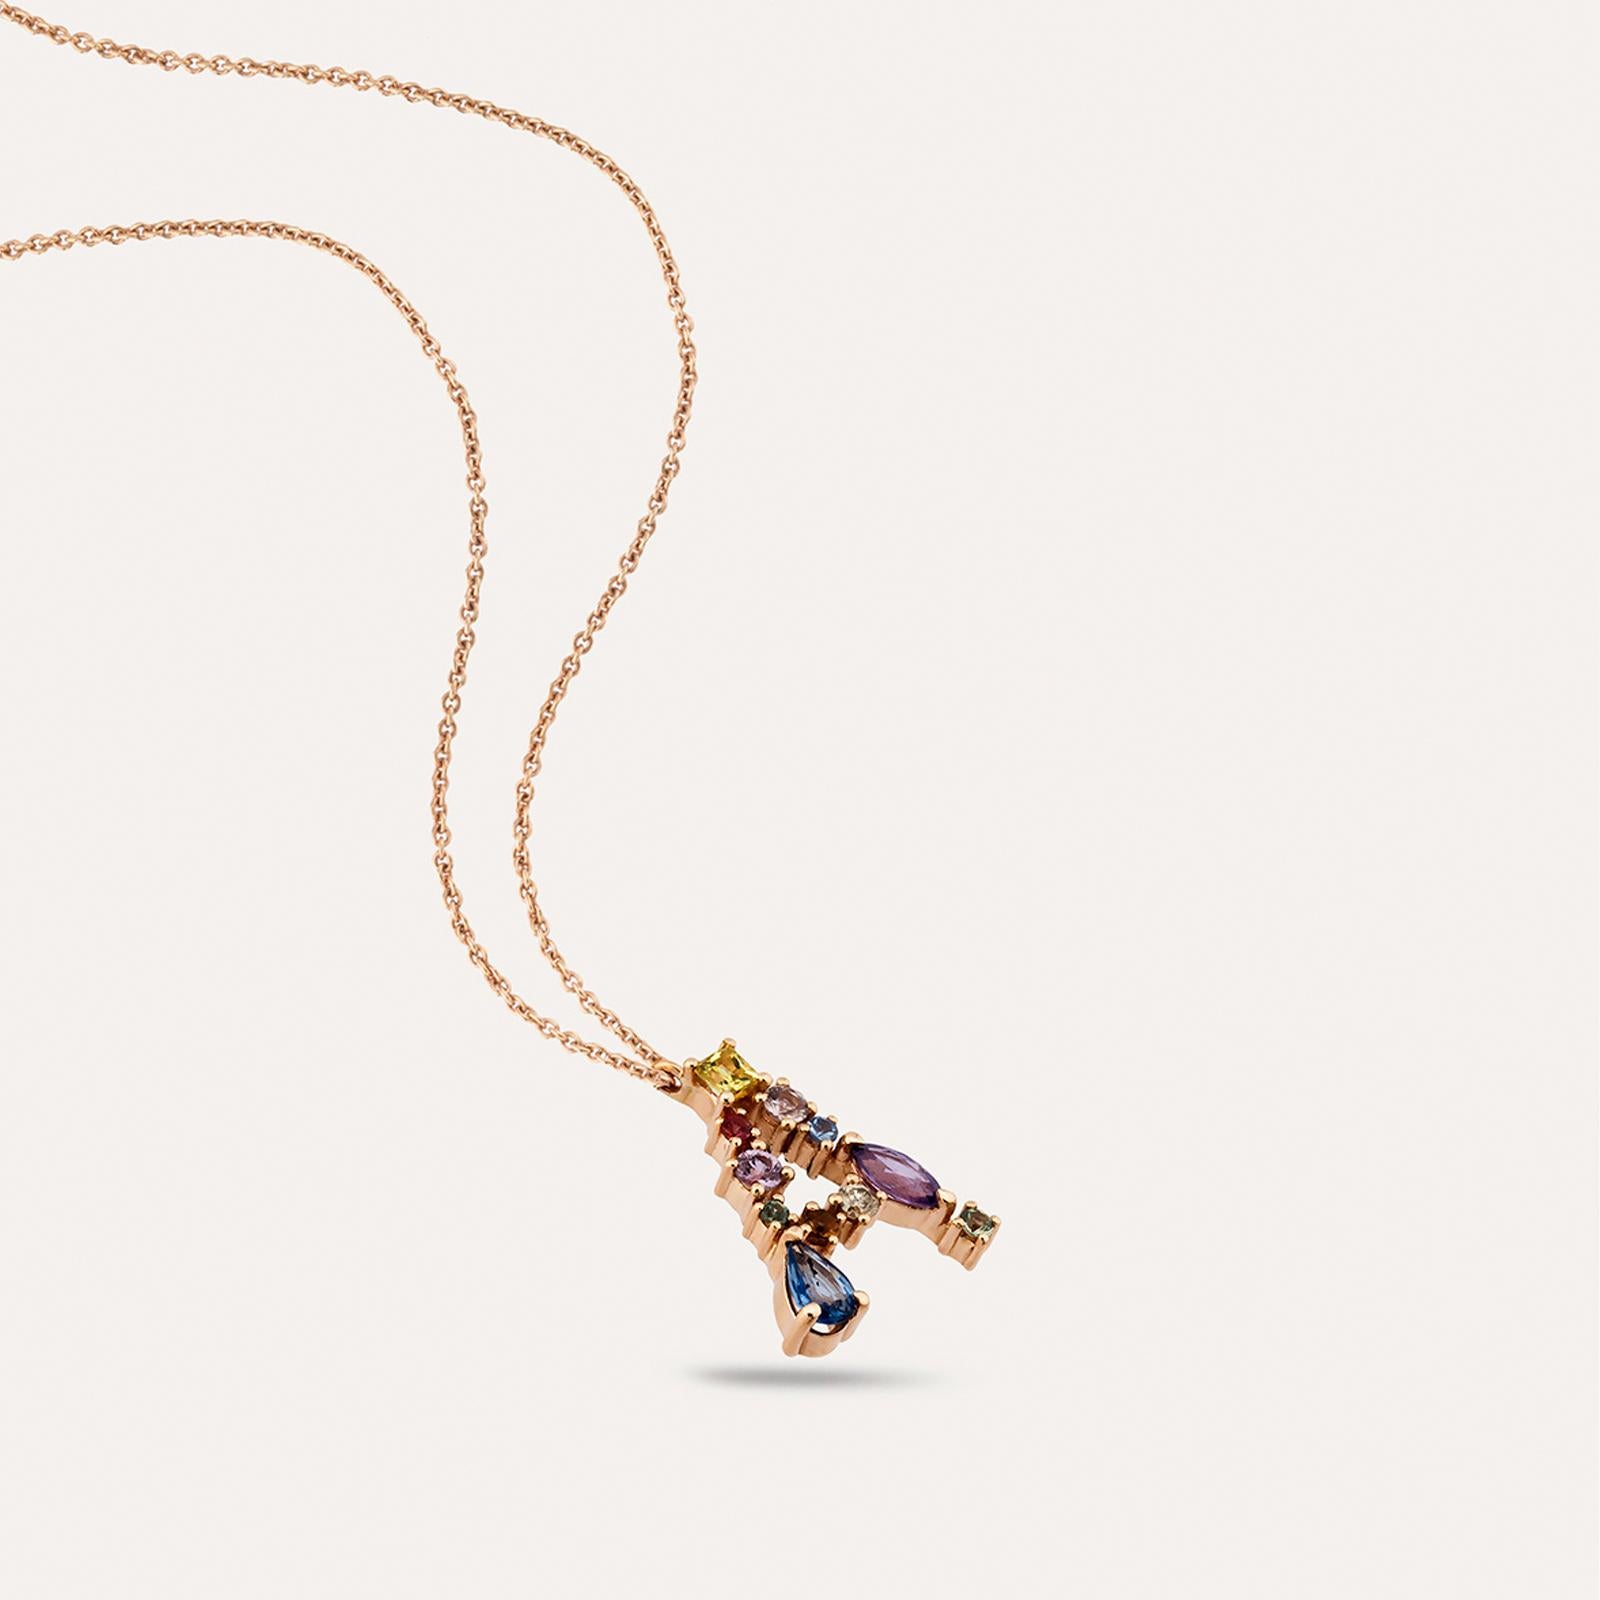 Best Christmas Gift of 2021, Multicolor Stones A Letter Rose Gold Necklace.

Brown Diamond: 	0,04ct.	1 Piece SI Color Round Cut
Multicolor Sapphire: 0,26ct.	1 Piece Pear Cut
Multicolor Sapphire: 0,09ct.	1 Piece Calibre Cut
Multicolor Sapphire: